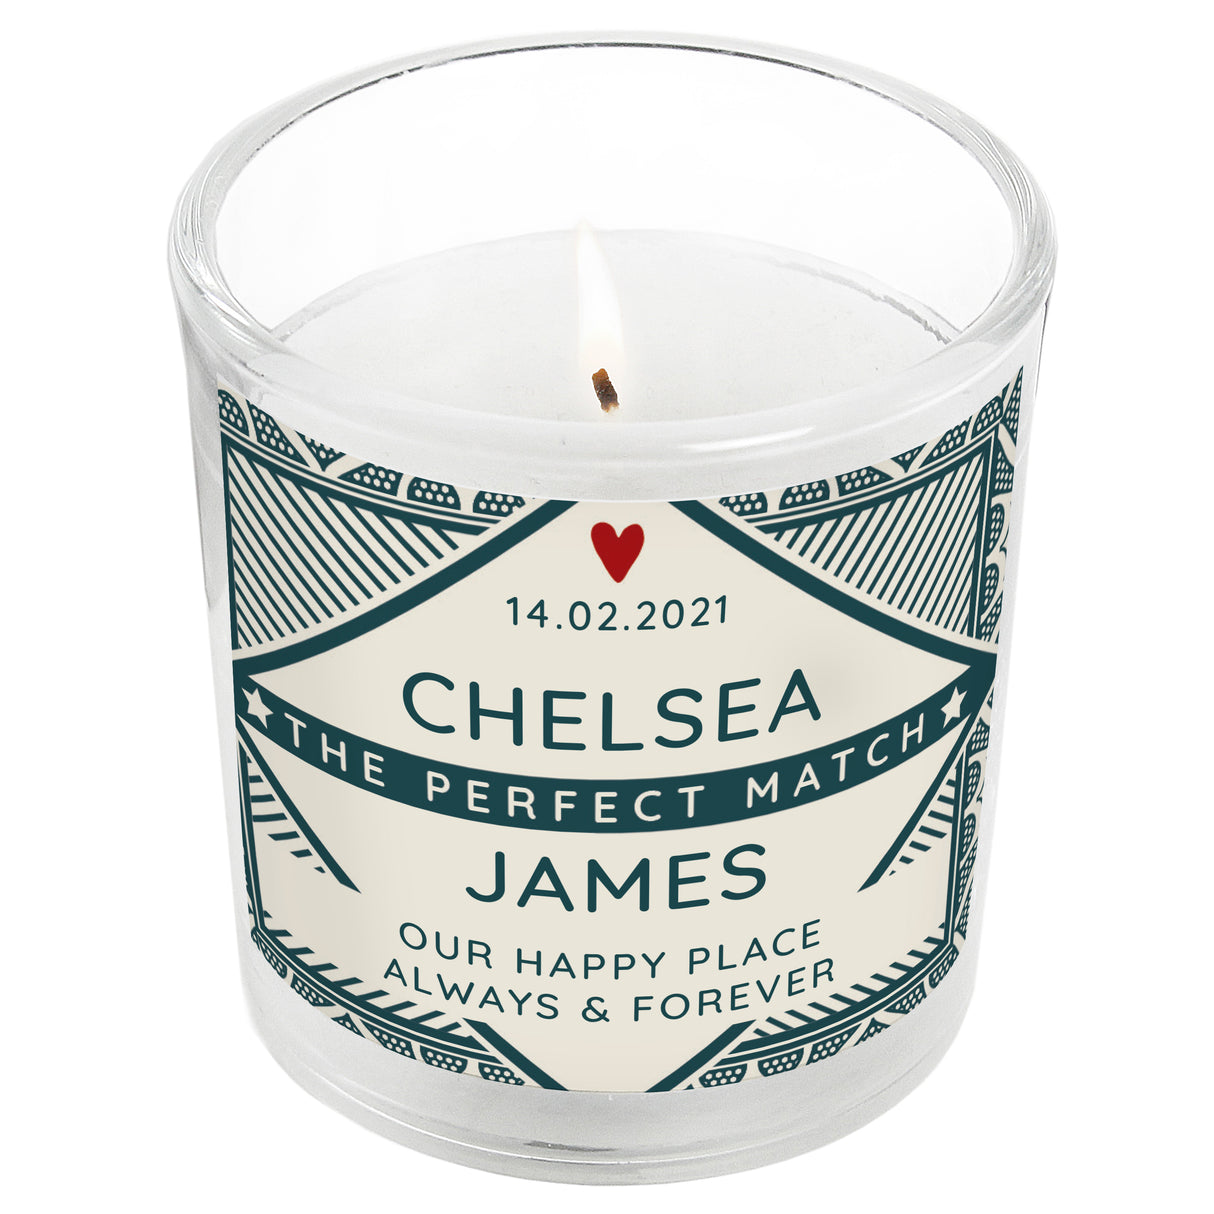 The Perfect Match Jar Candle - Gift Moments